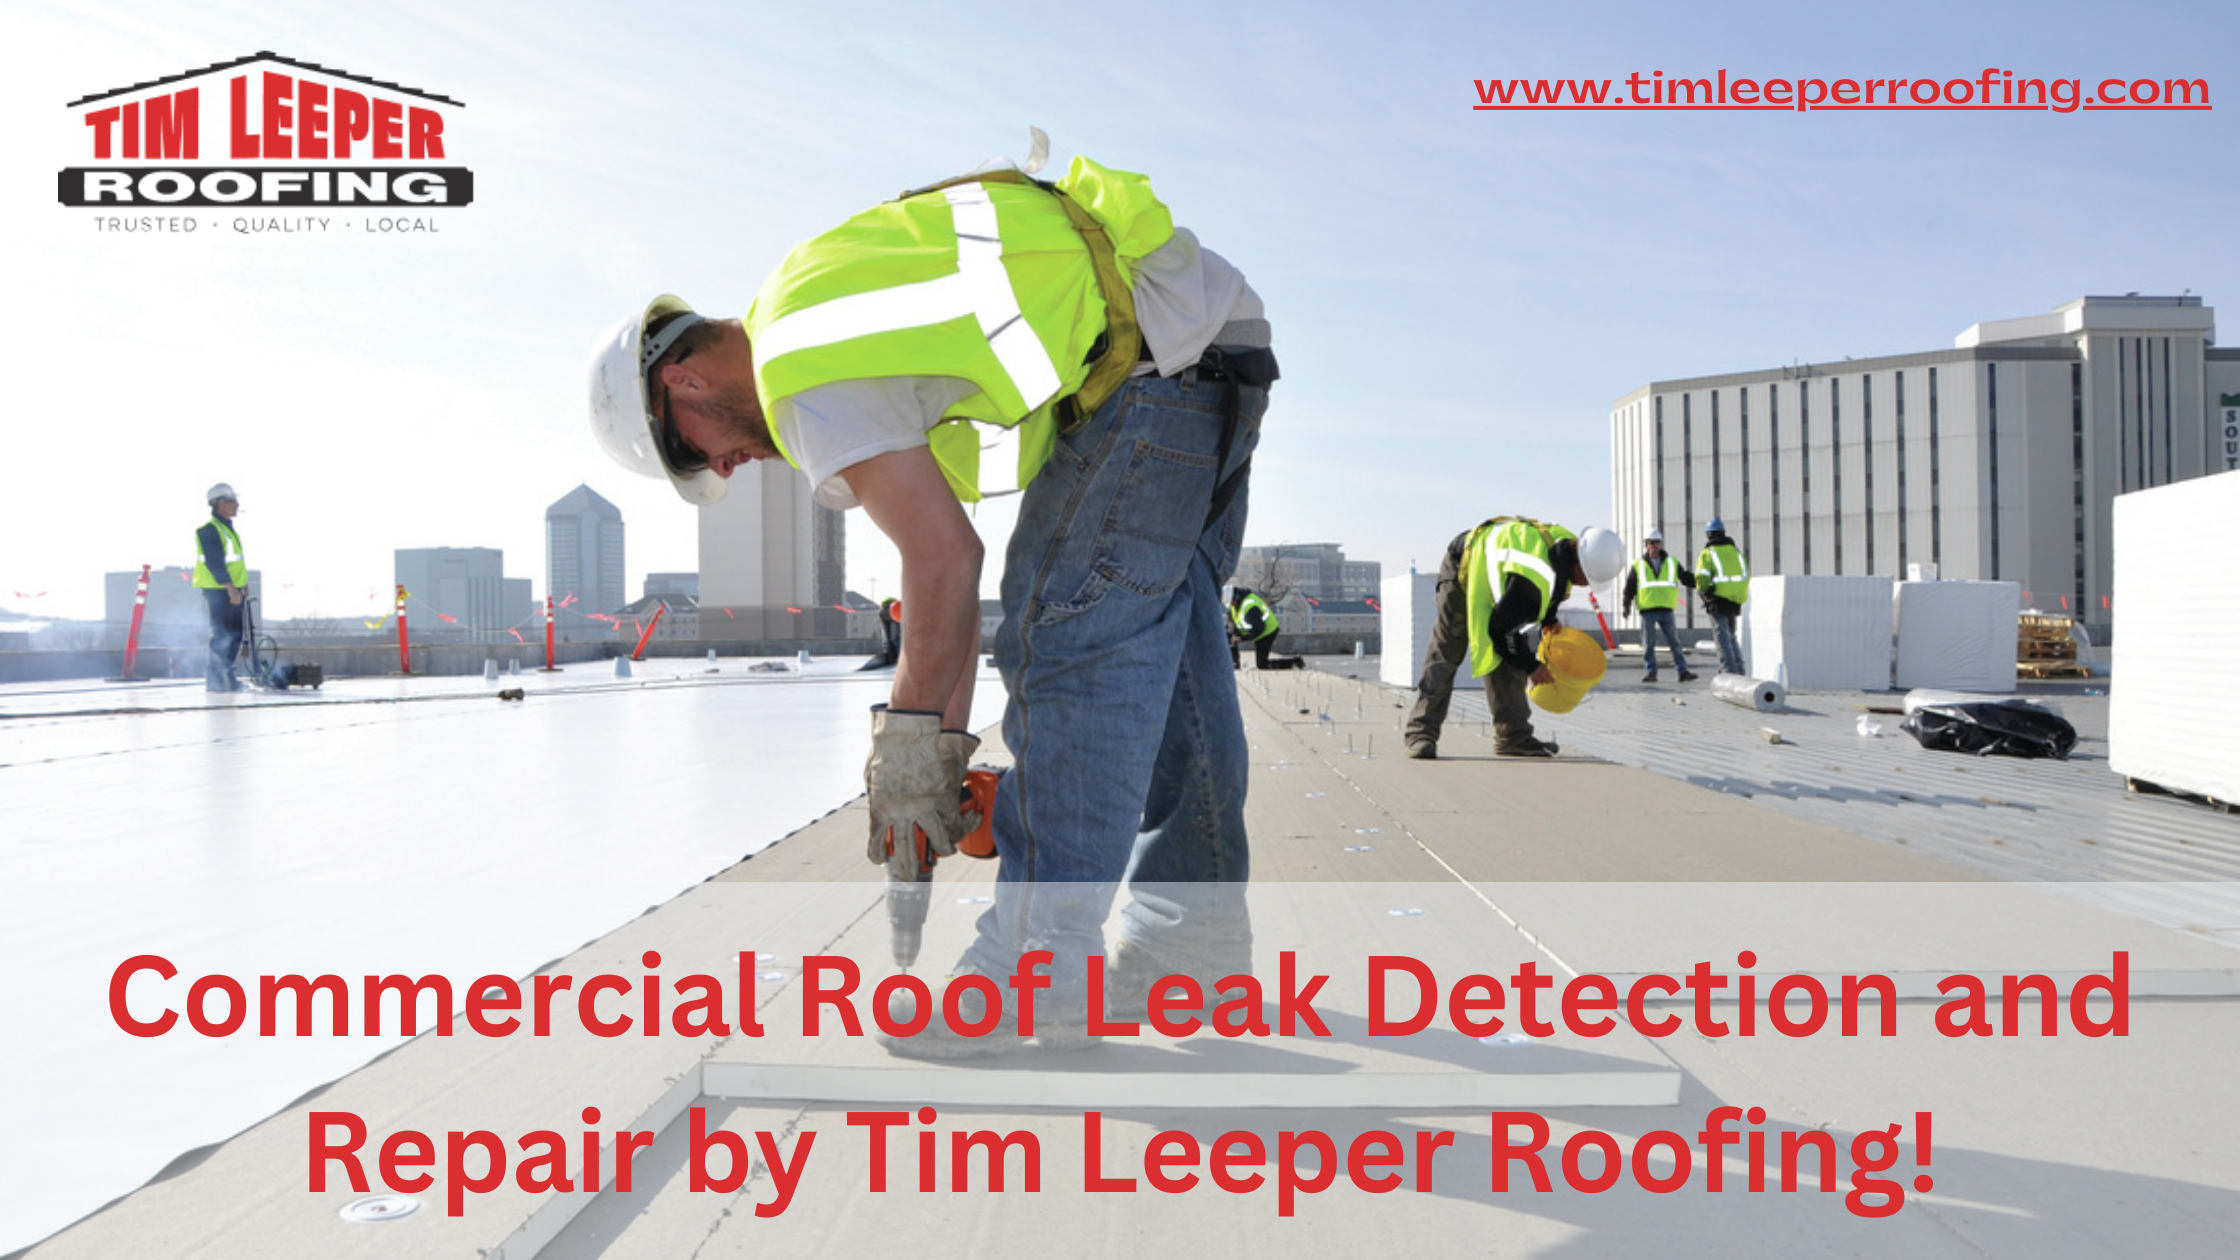 Commercial Roof Leak Detection and Repair by Tim Leeper Roofing